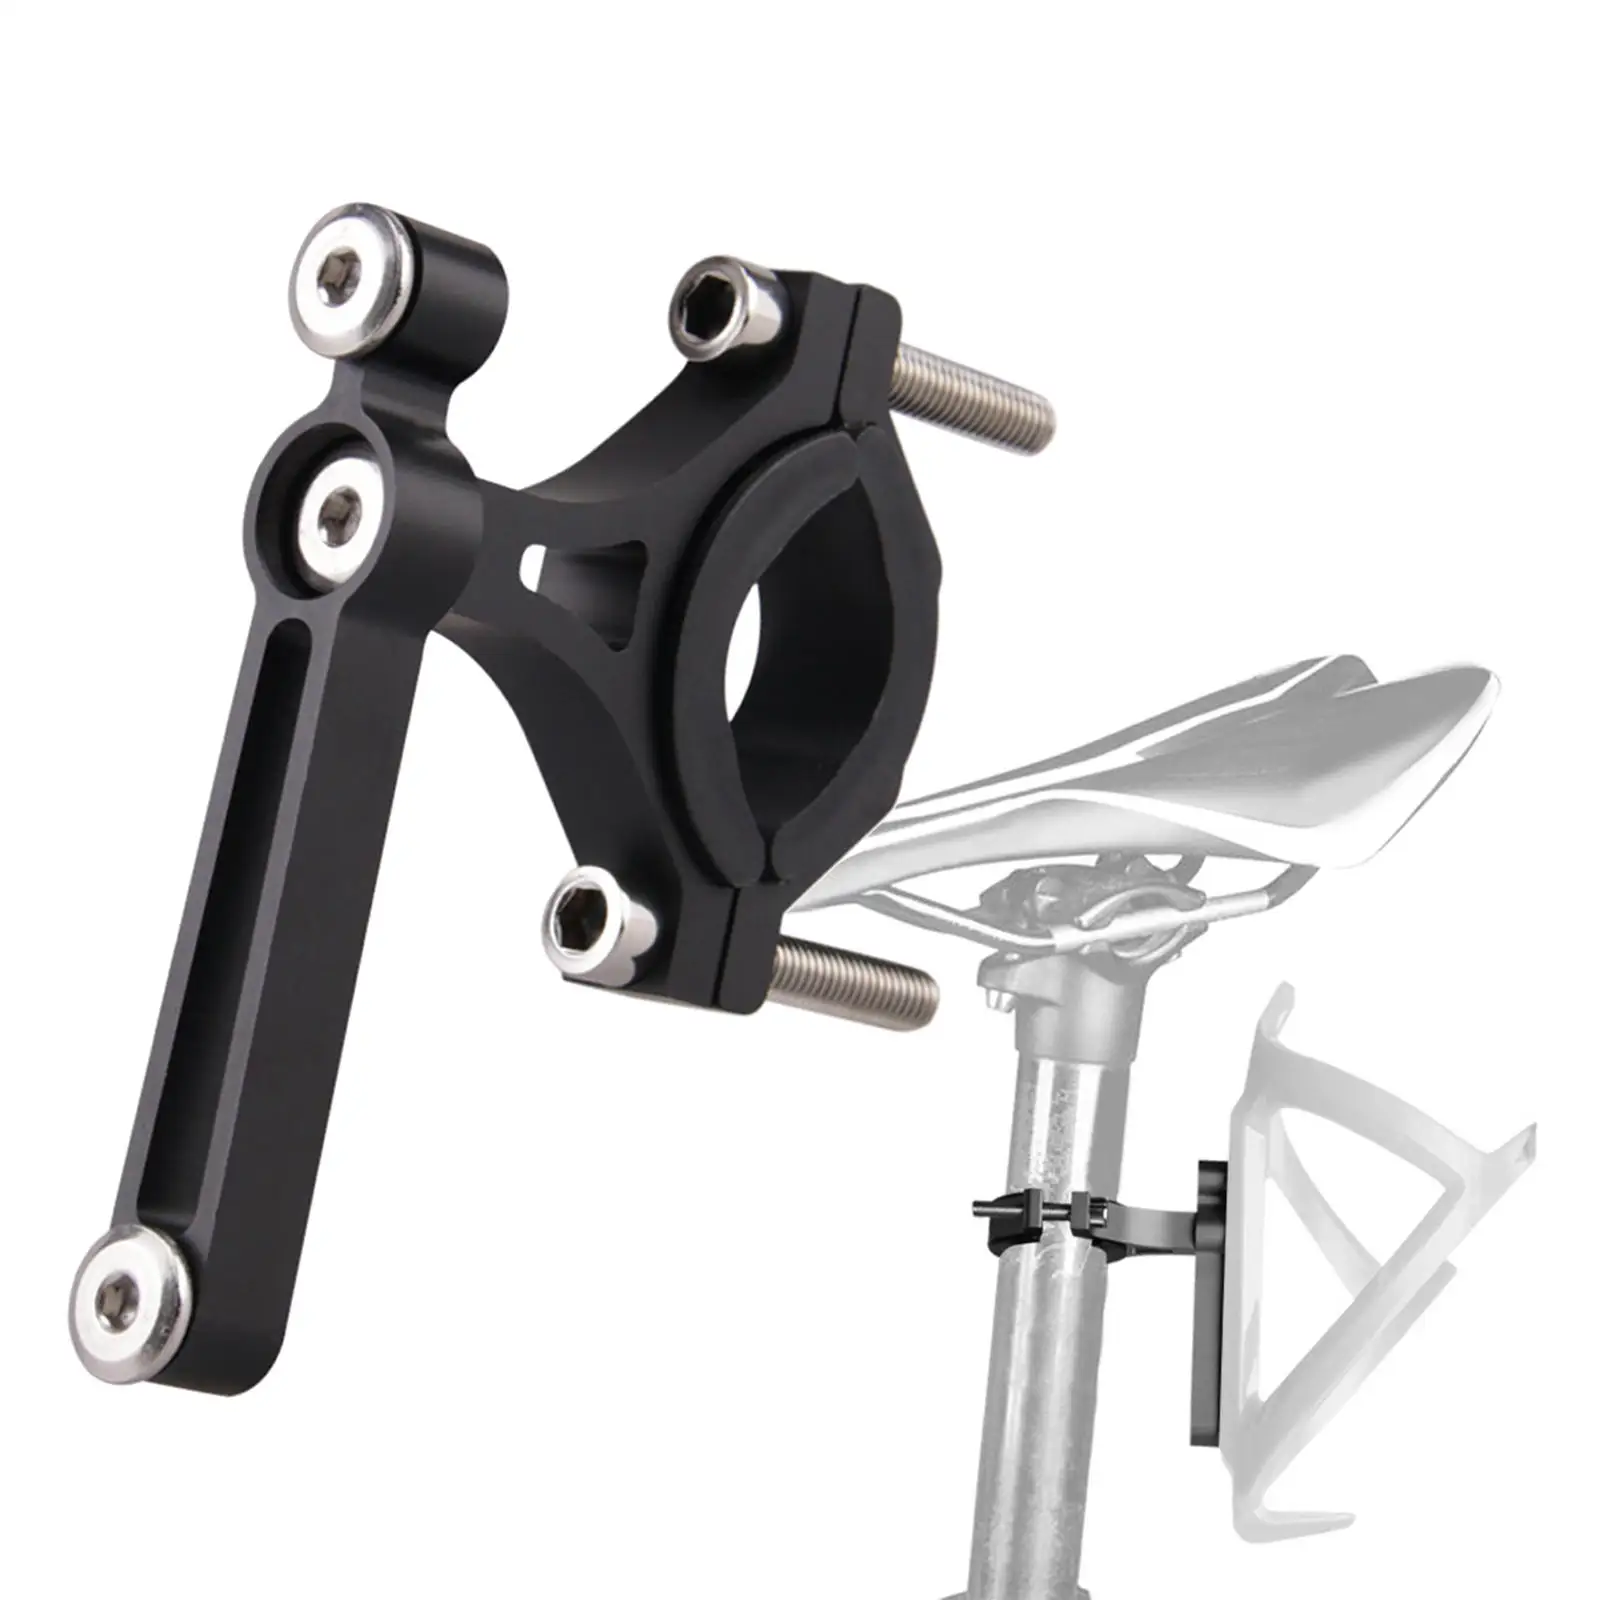 Bike Water Bottle Holder Clamp Clip, MTB Bicycle Cup Mount Adapter for Seat Post or Handlebar